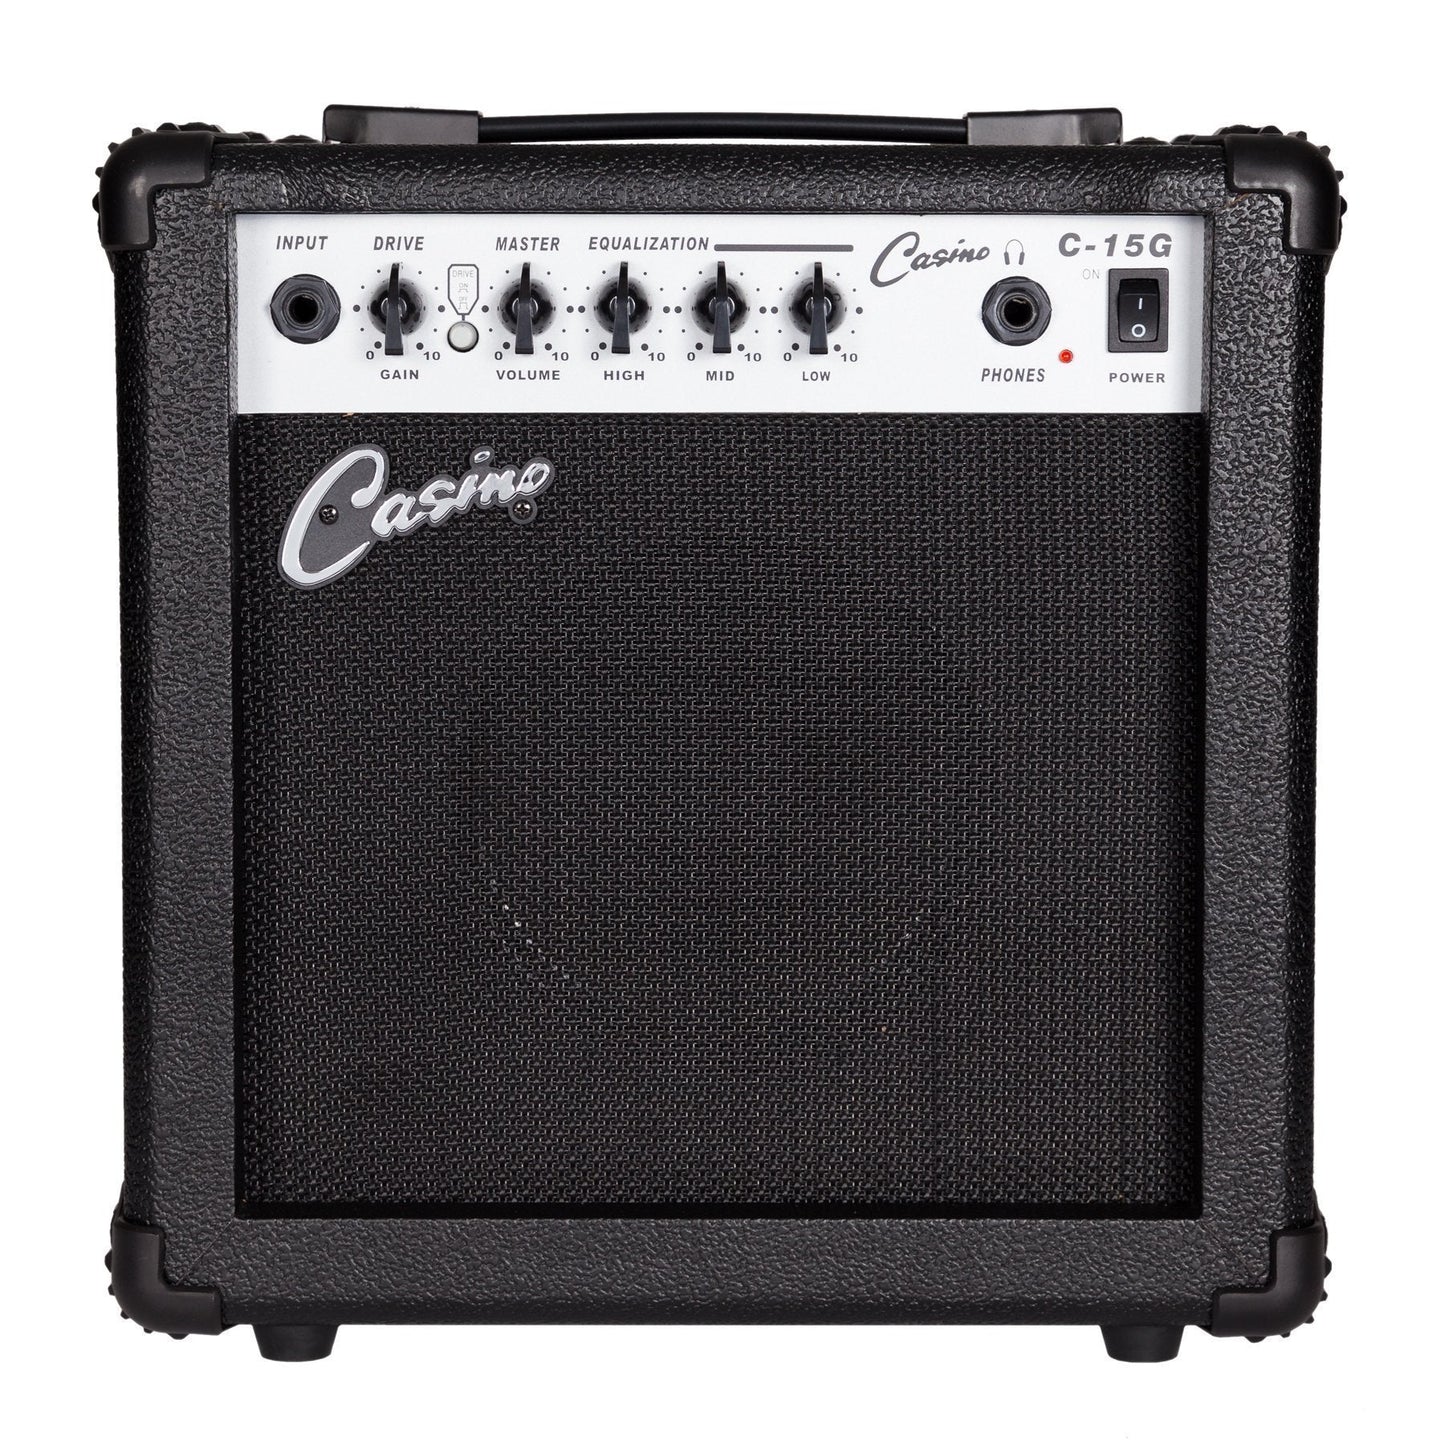 Casino ST-Style Electric Guitar and 15 Watt Amplifier Pack (White)